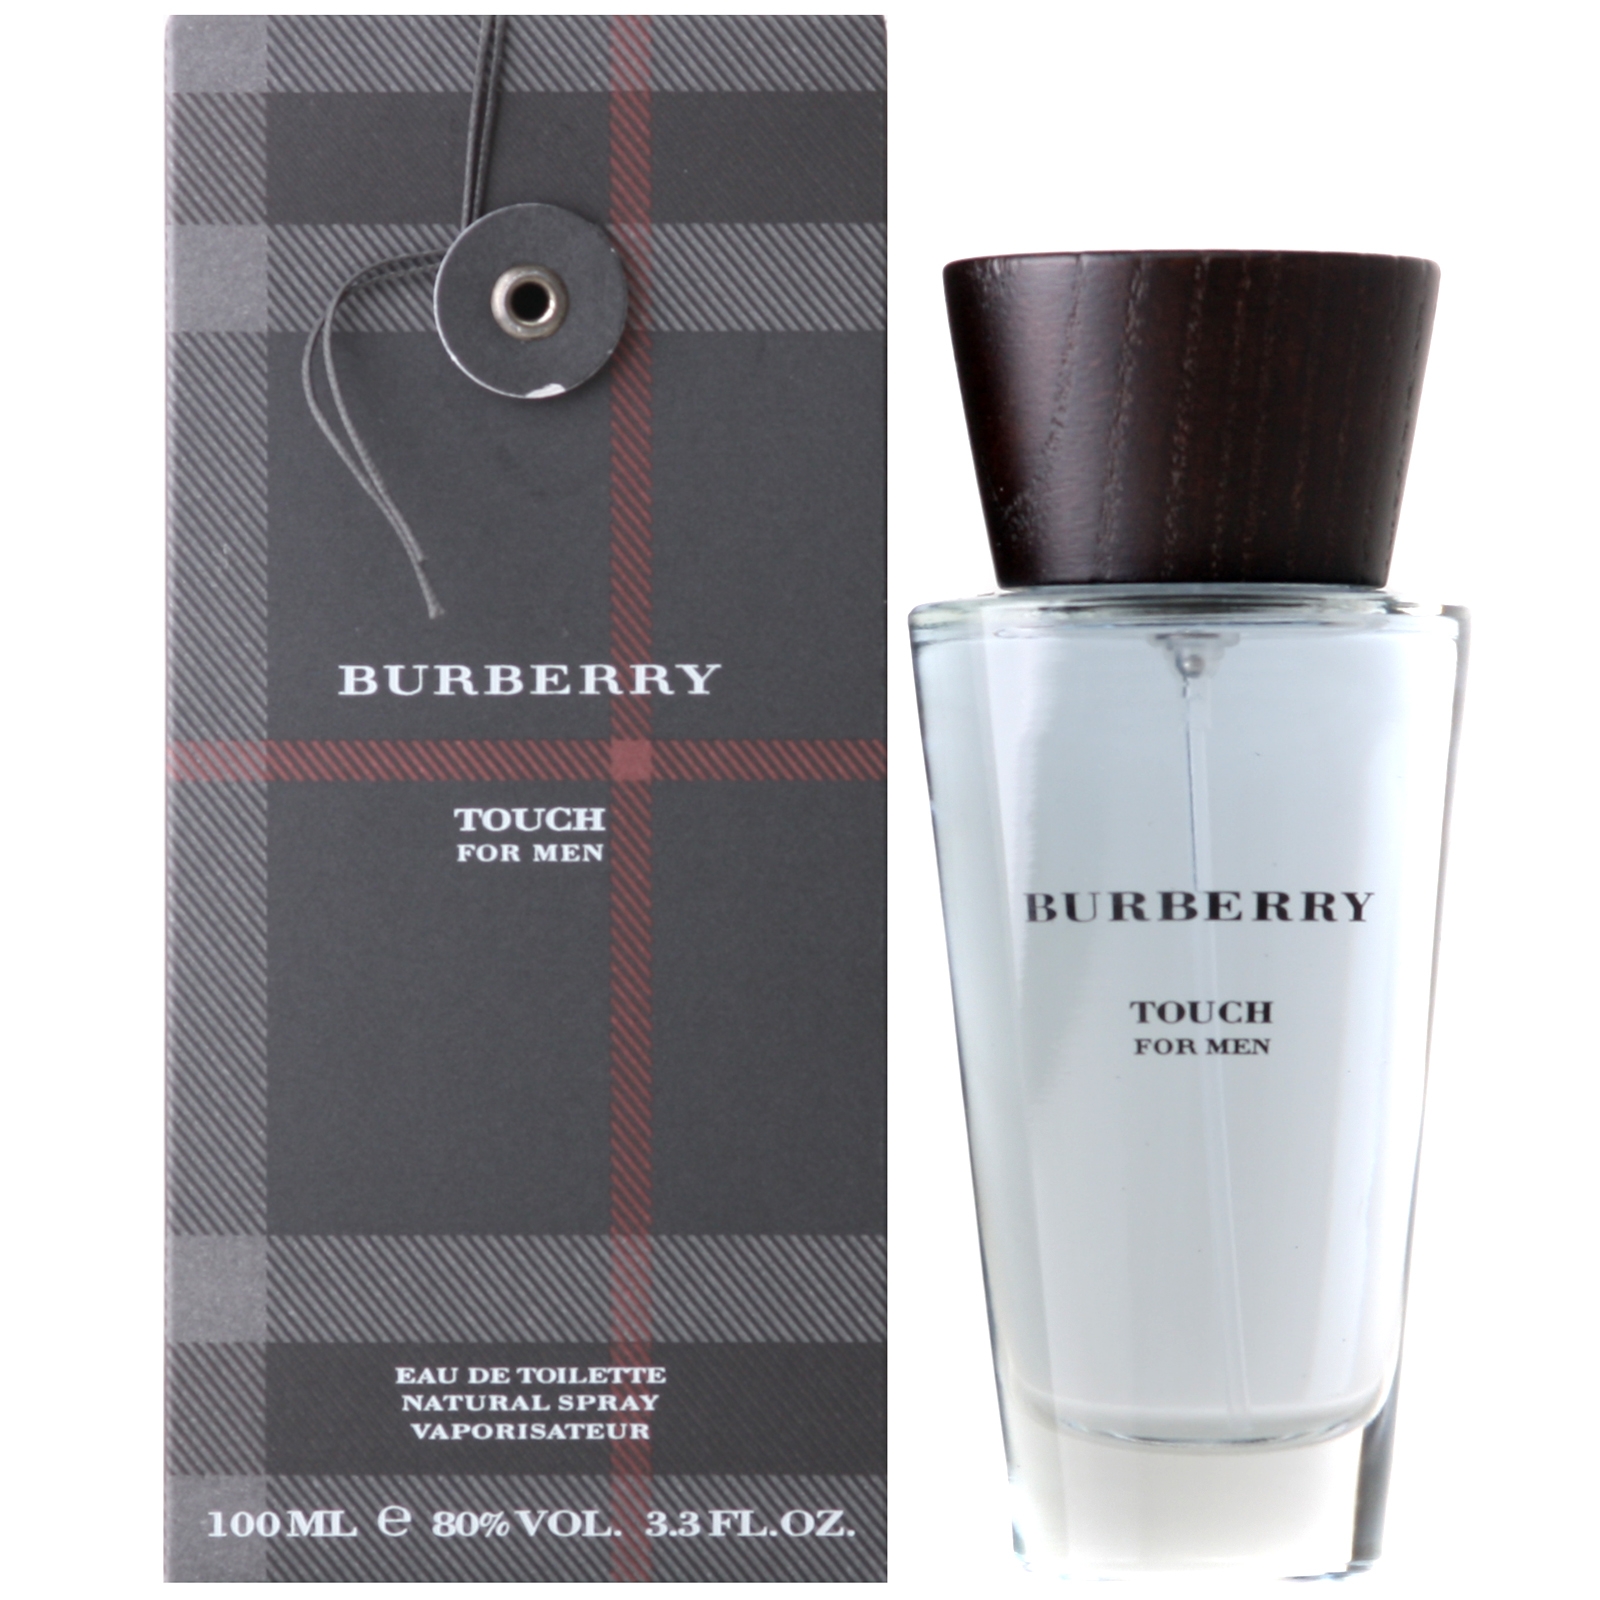   Burberry Touch for Men EDT 100 ml  